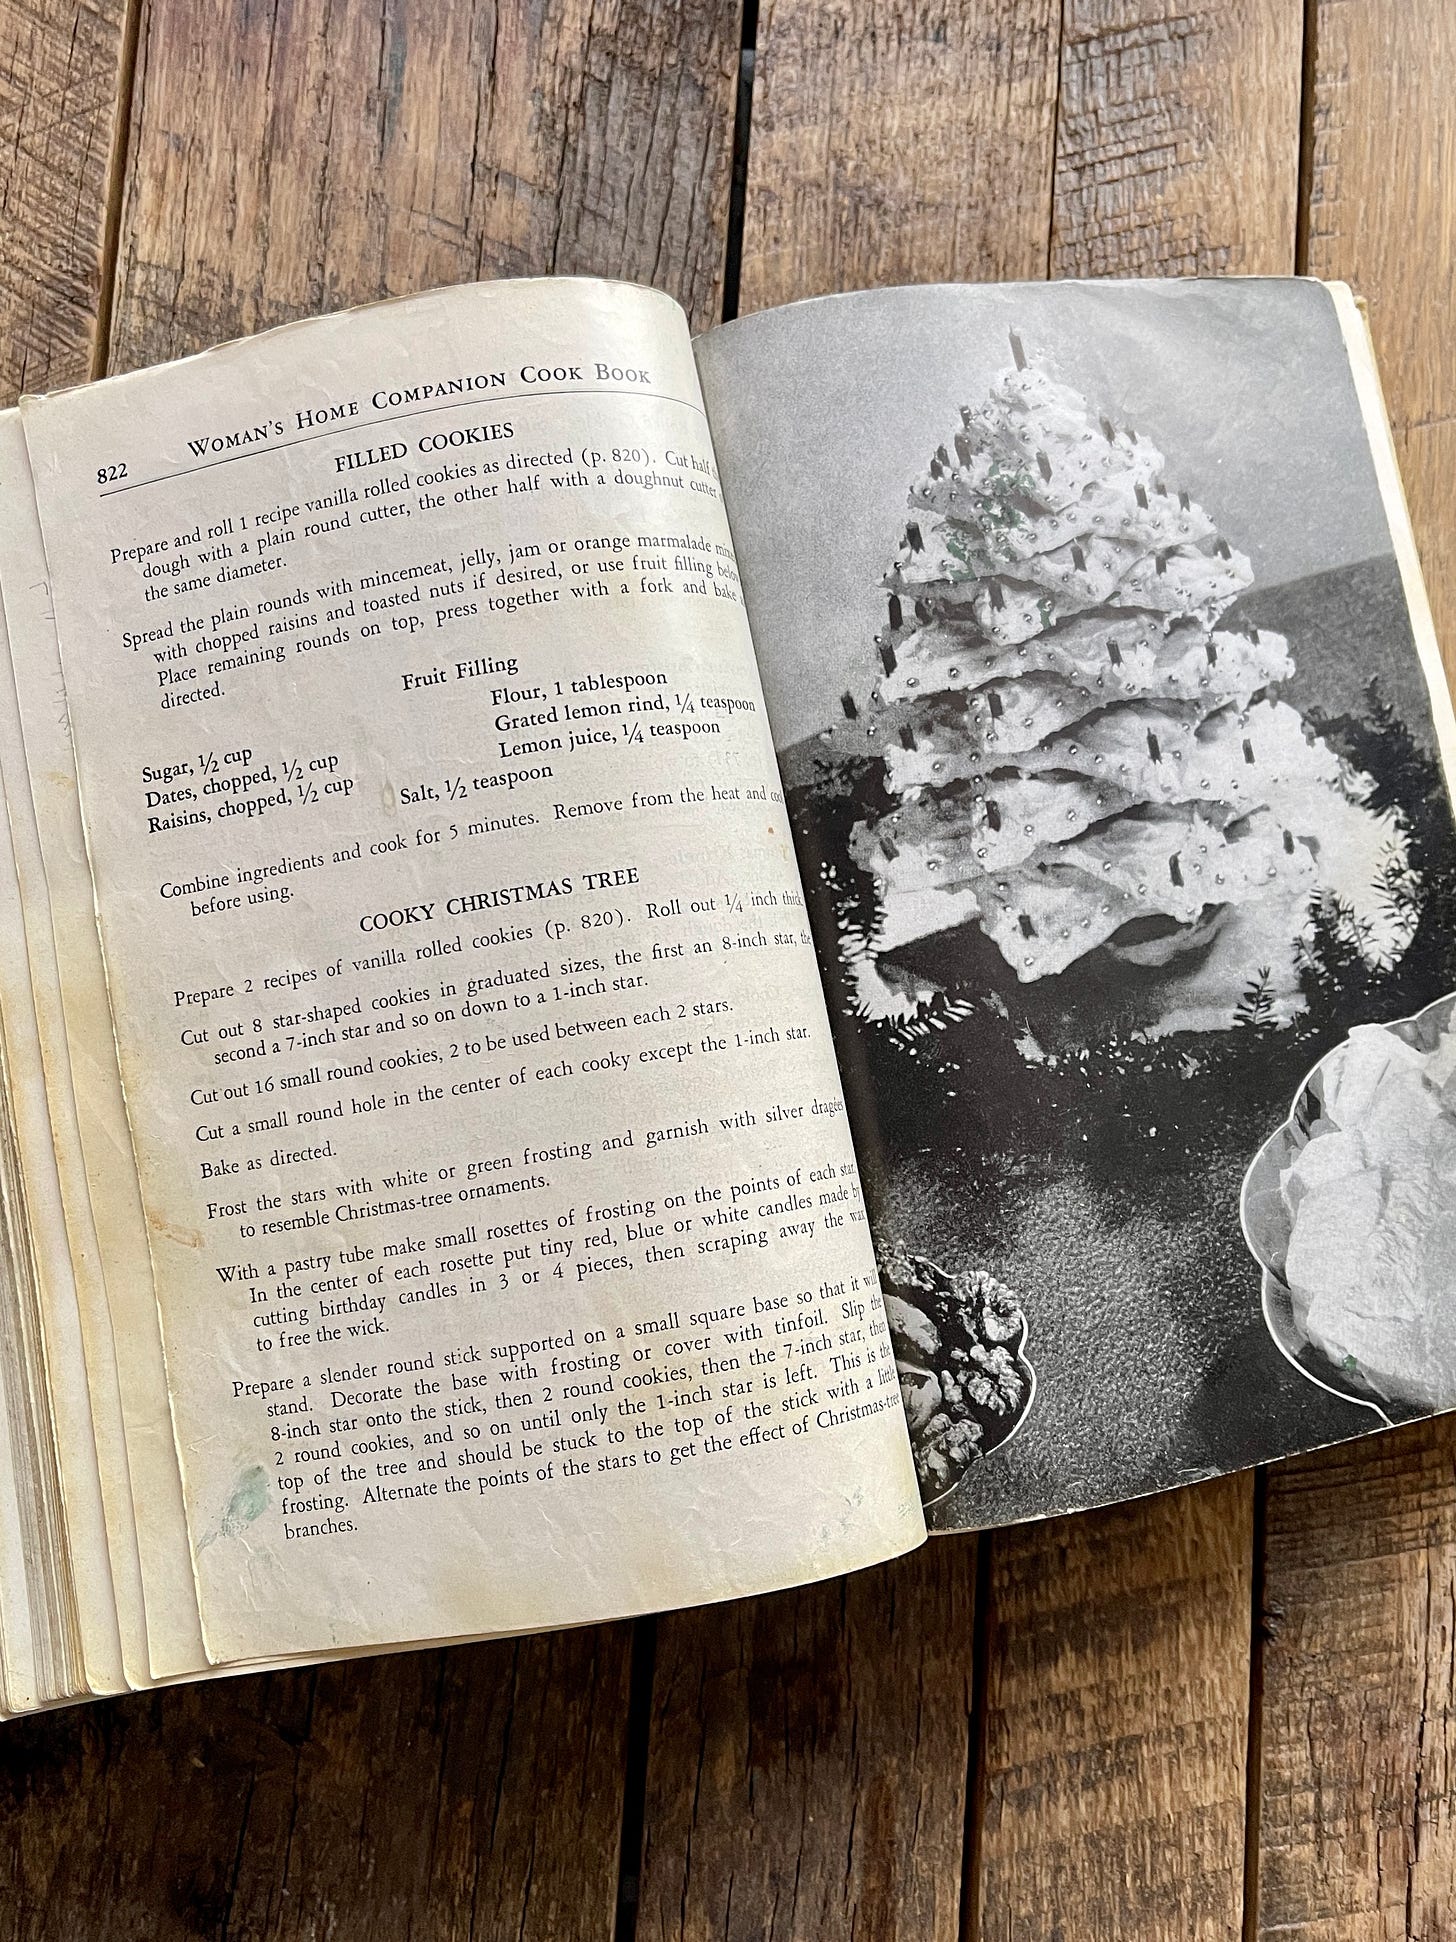 Woman's Home Companion Cookbook Cooky Christmas Tree pages